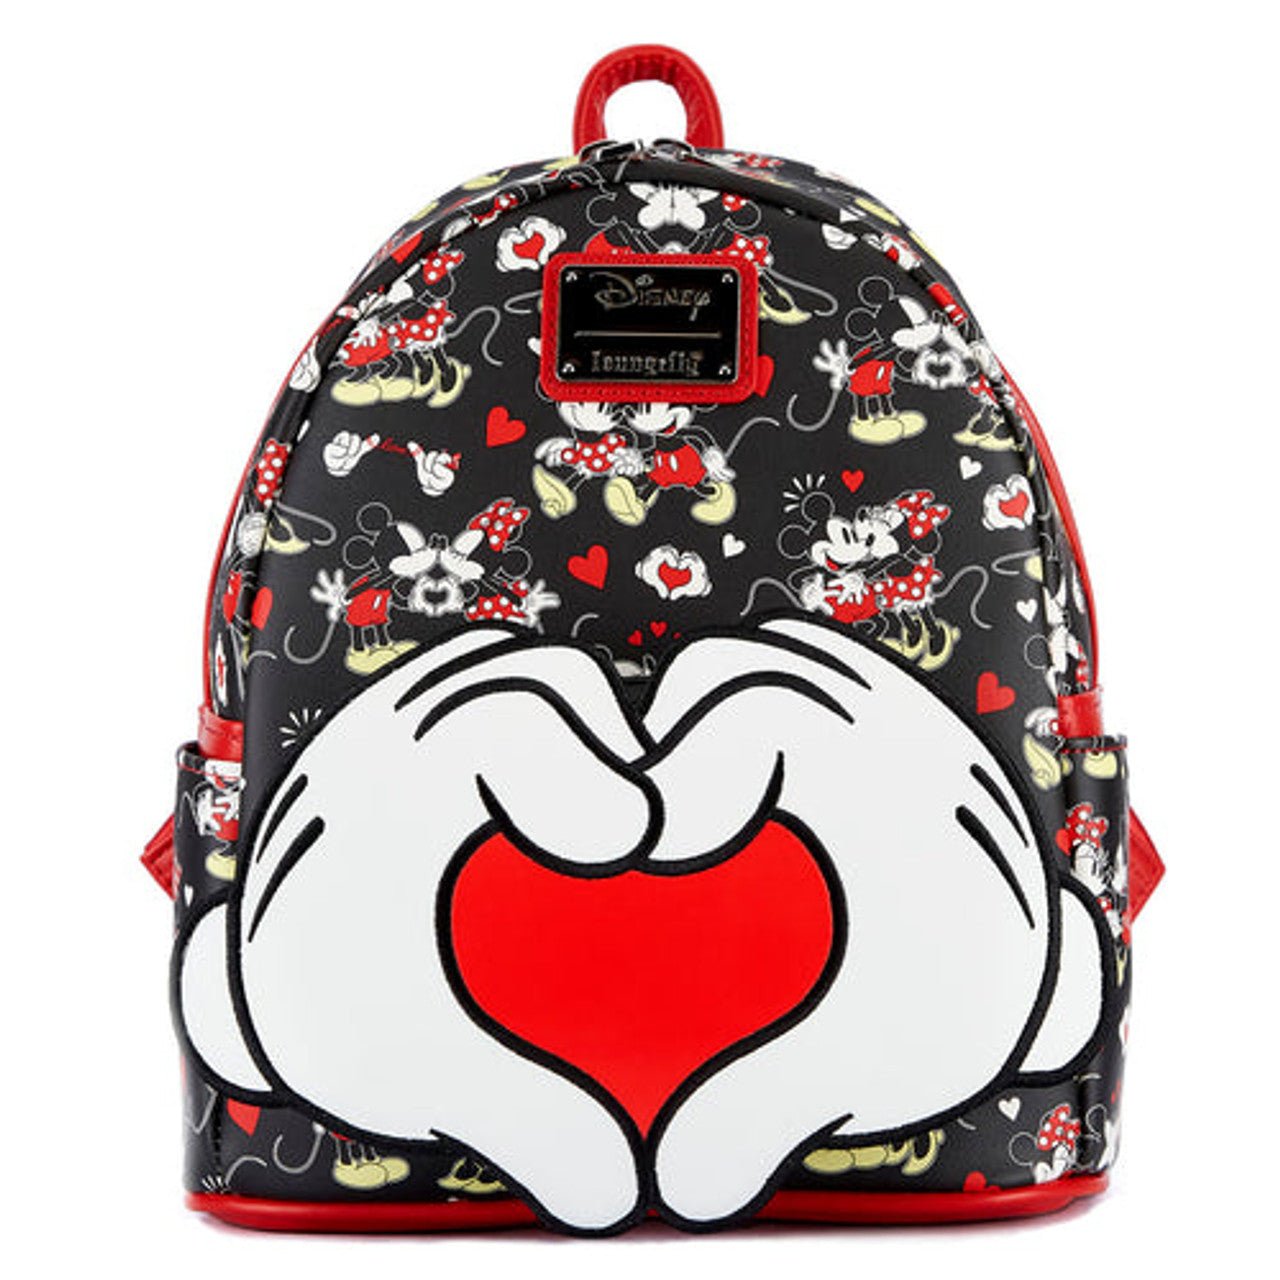 Mickey & Minnie Mouse Love Mini Backpack - Loungefly - 1